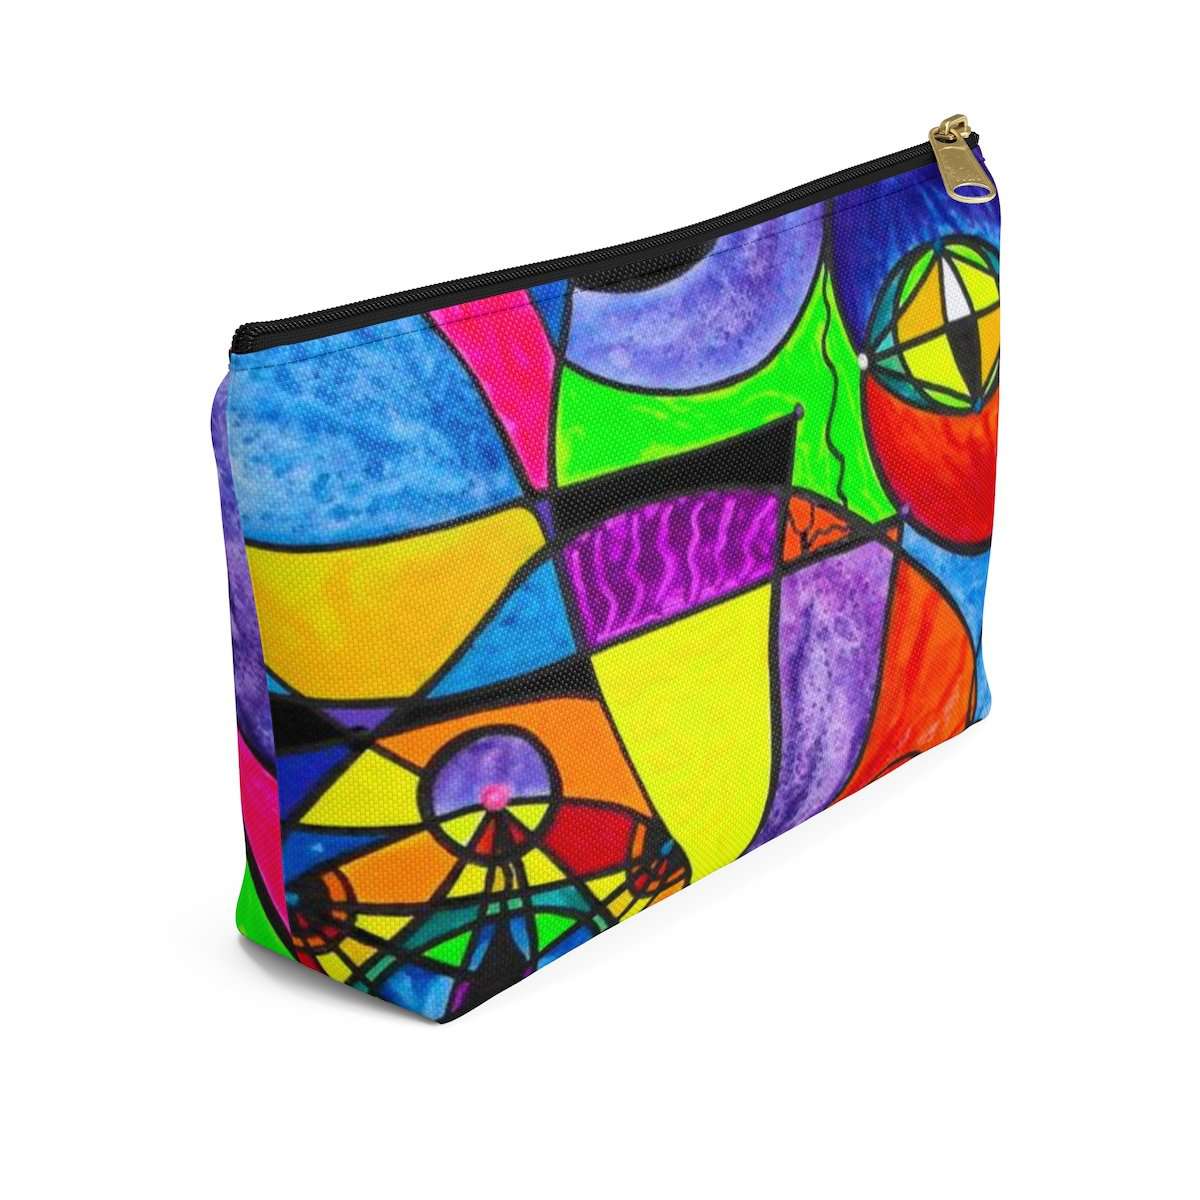 find-your-favorite-the-power-lattice-accessory-pouch-w-t-bottom-online-sale_8.jpg